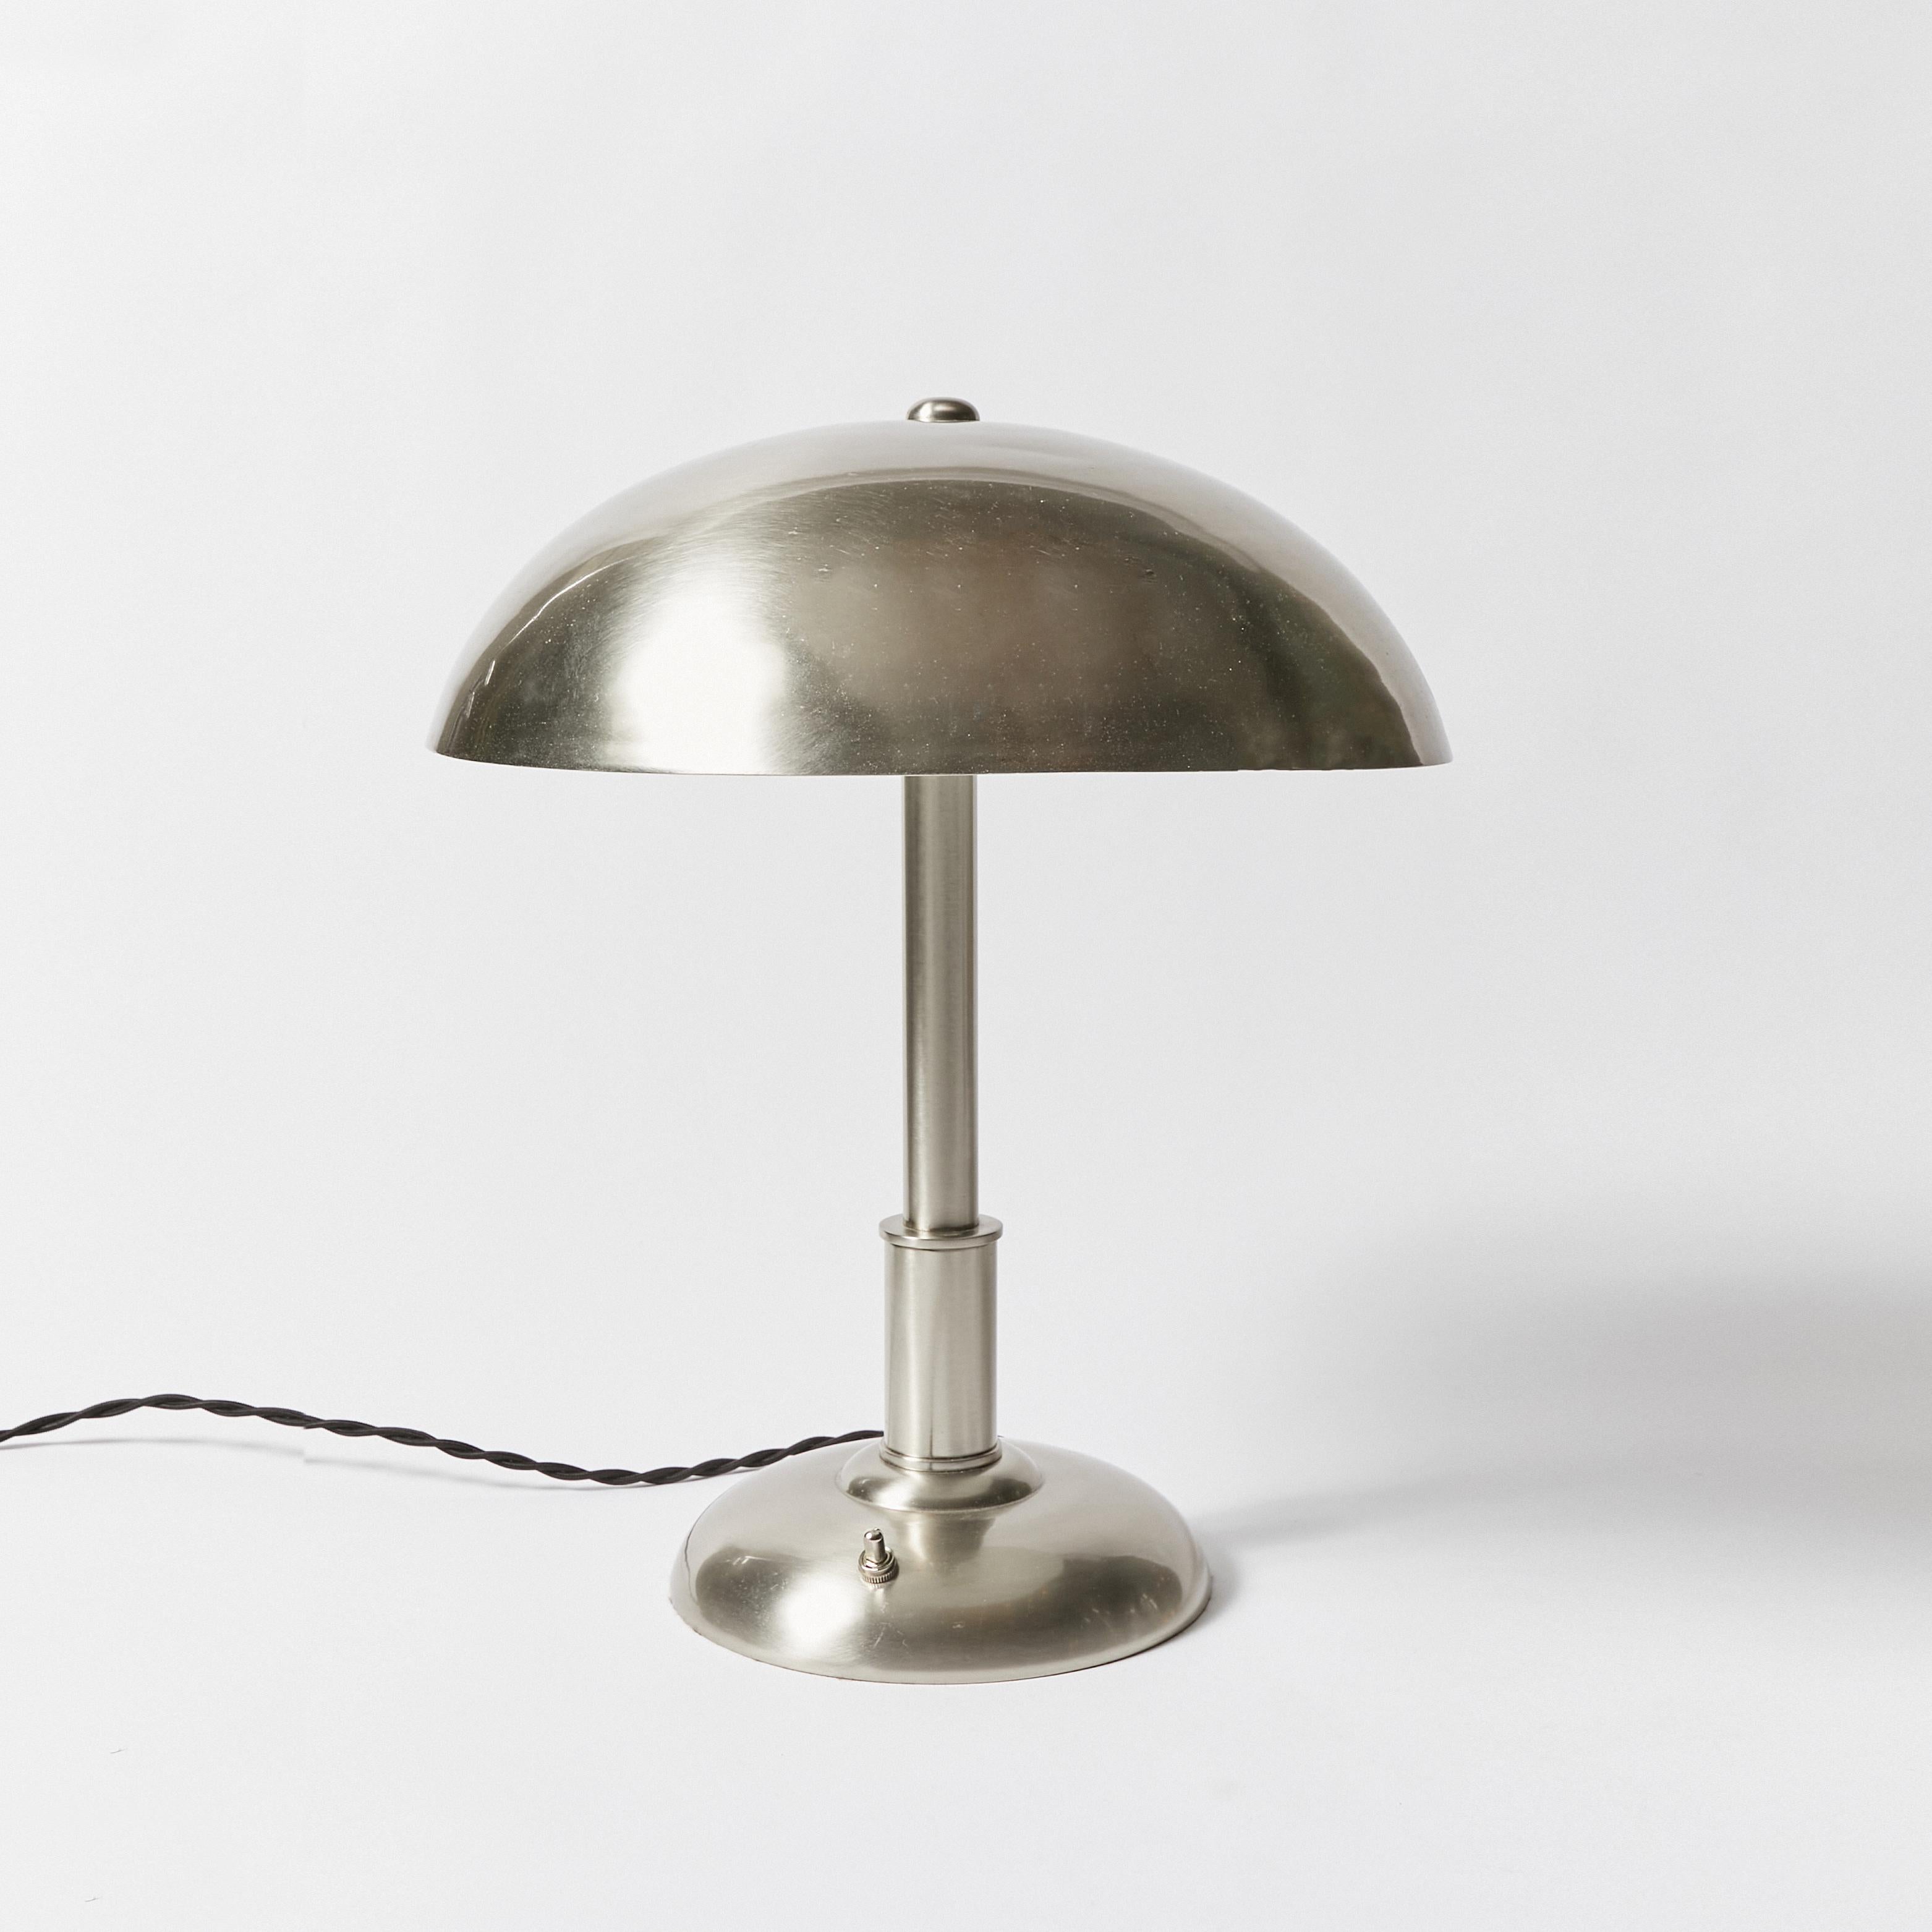 Art Deco style desk lamp with domed metal shade.